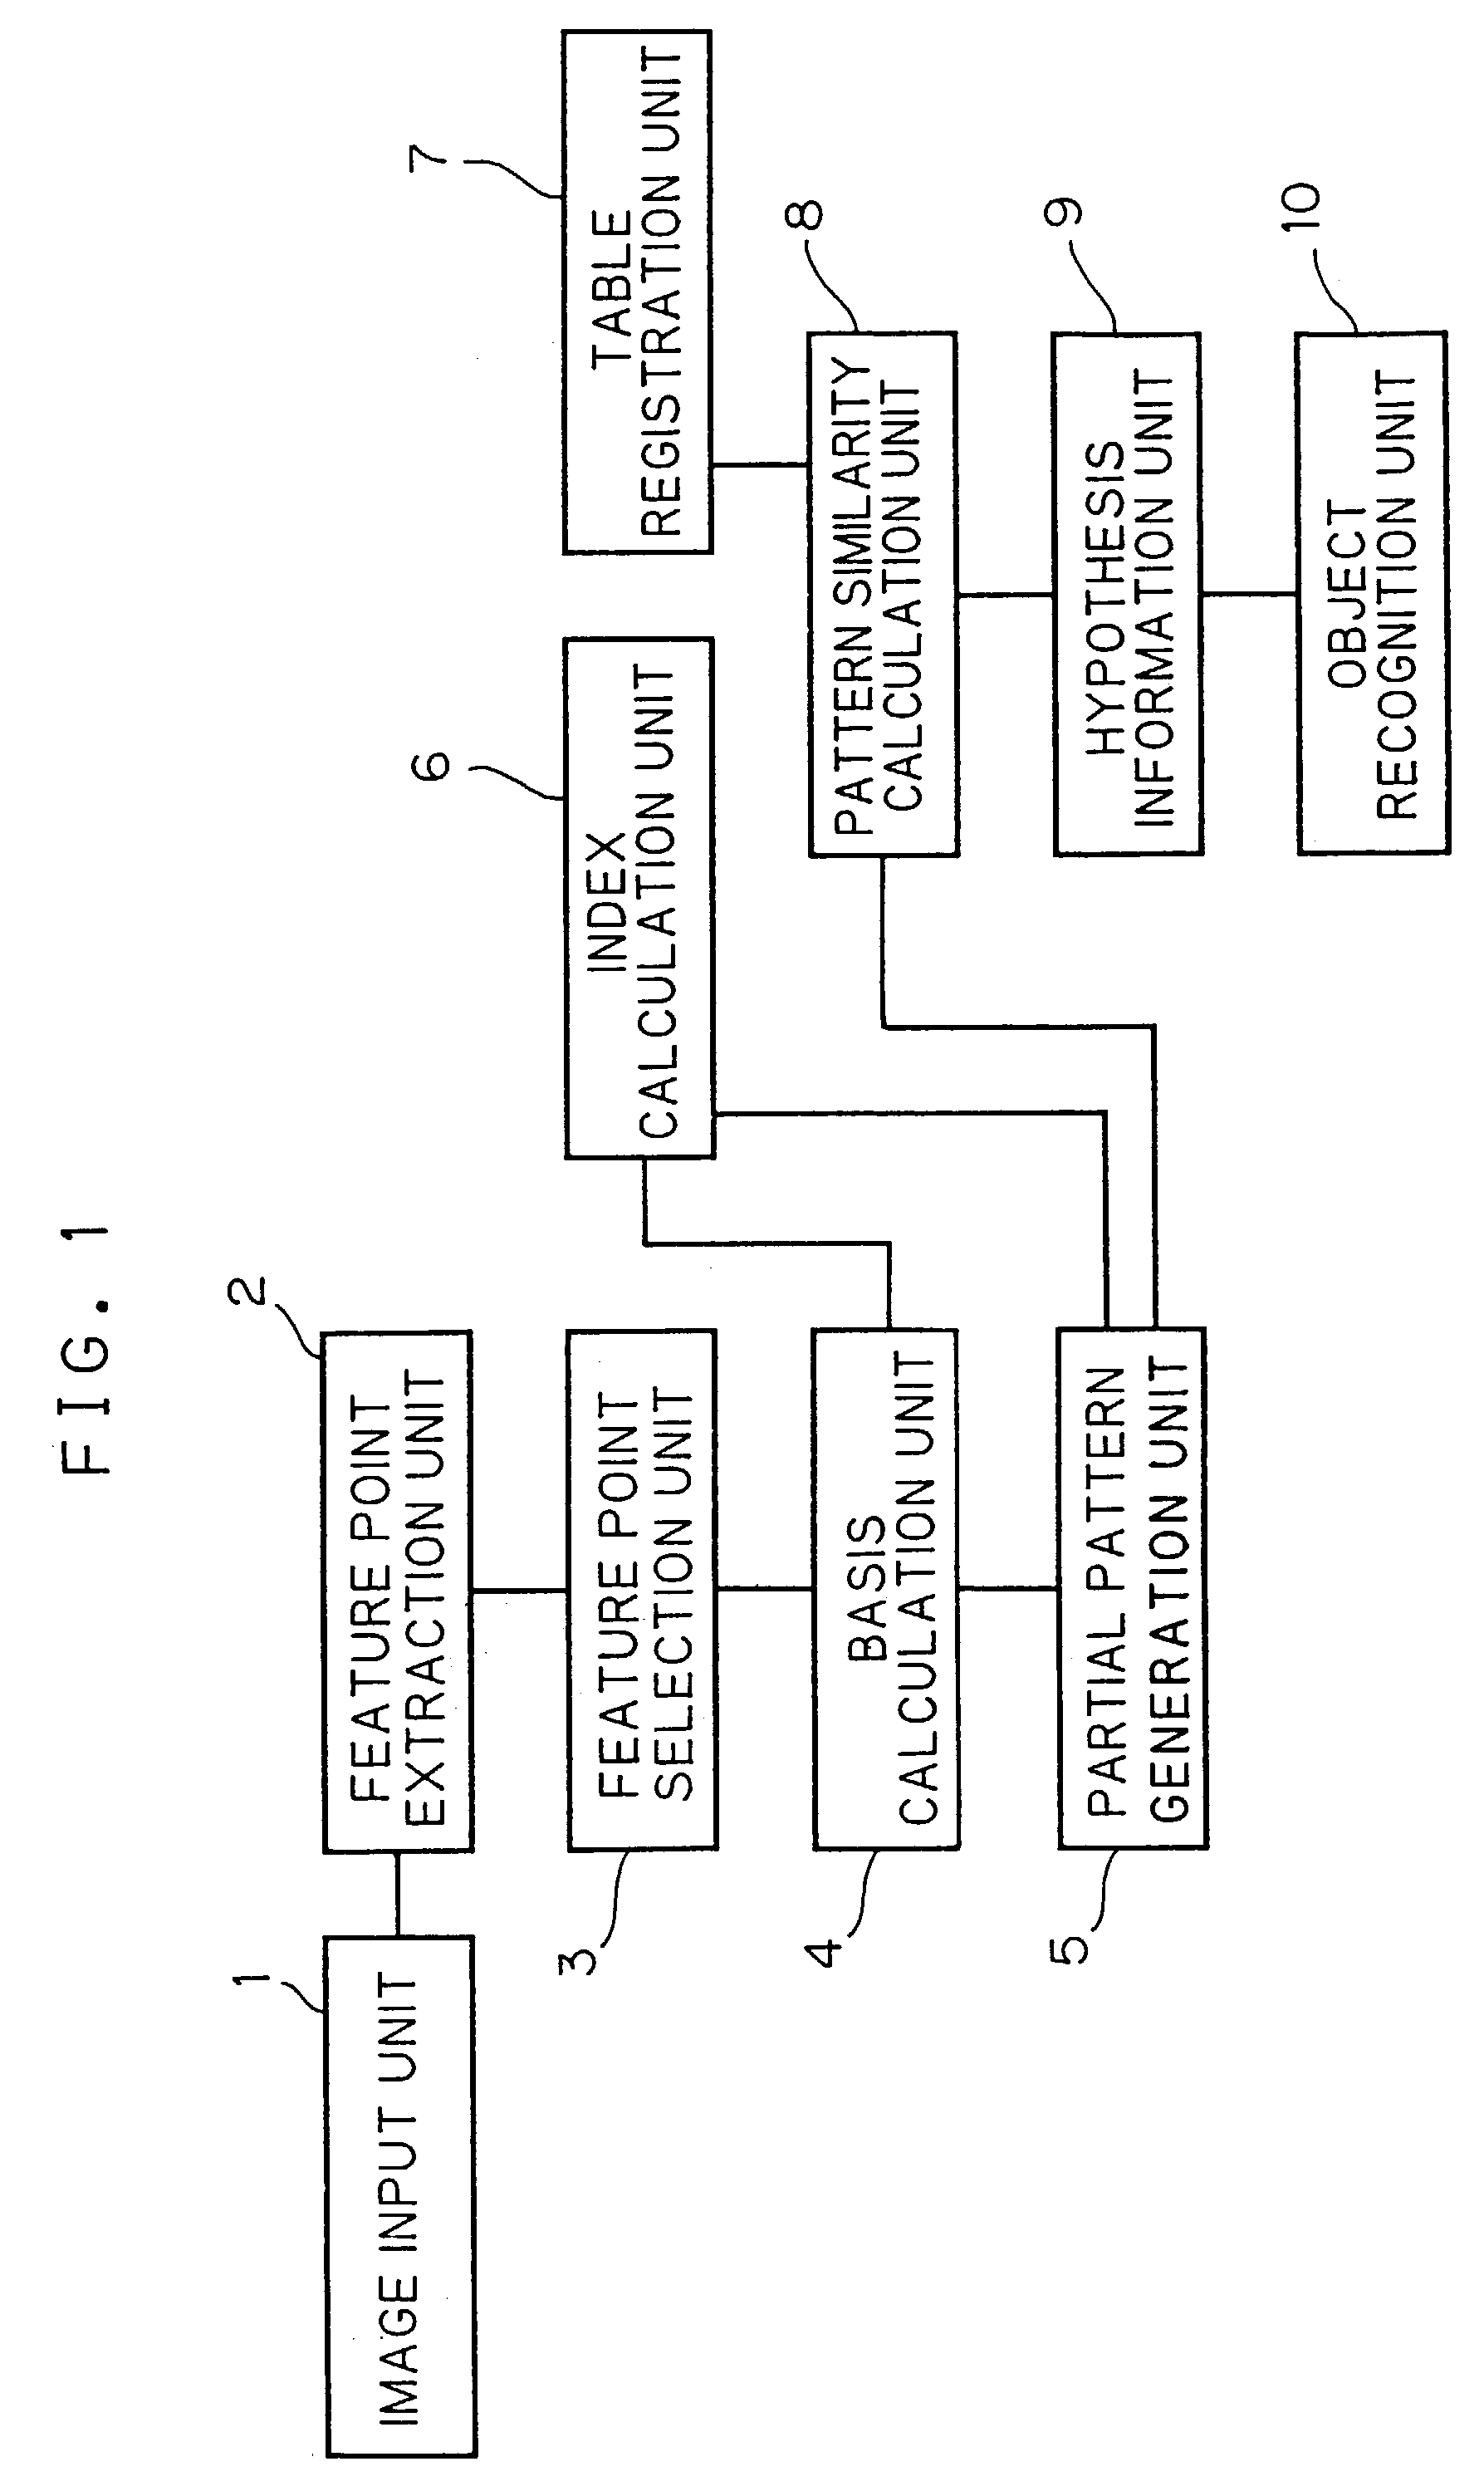 Pattern recognition apparatus and method using distributed model representation of partial images